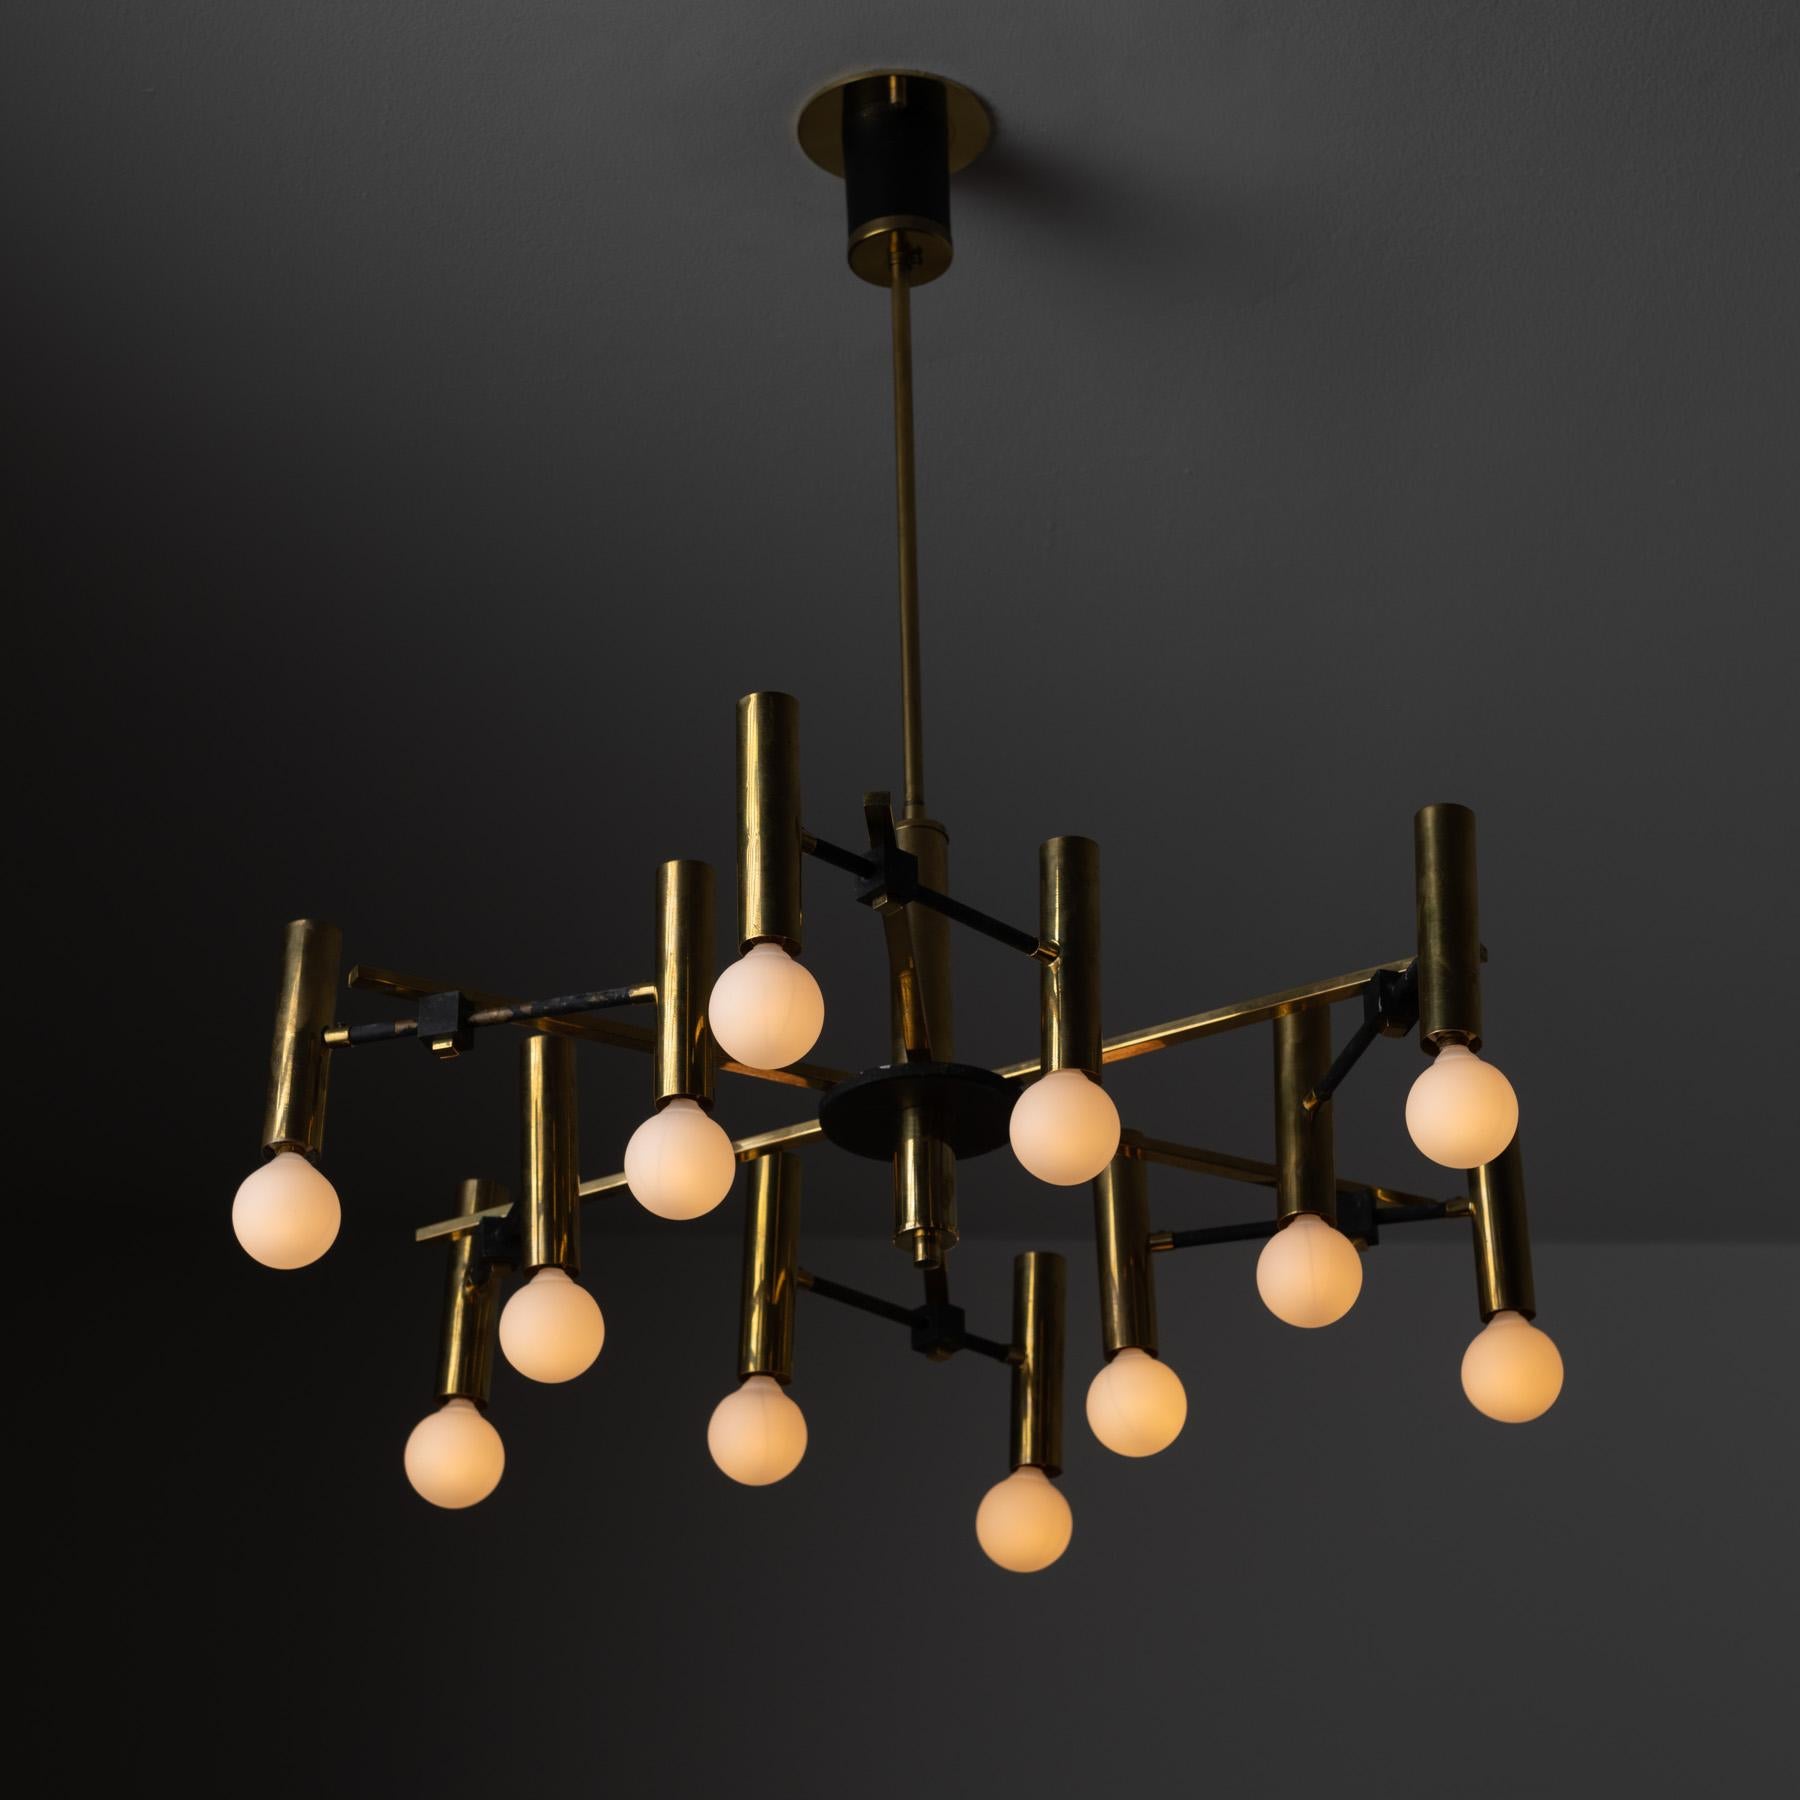 Chandelier by Arteluce. Designed and Manufactured in Italy, circa the 1950s. Naturally aged brass throughout with black enameled accents on joints and canopy. Rewired for US standards. Takes twelve E14 60 watts max bulbs. Bulbs provided as a one